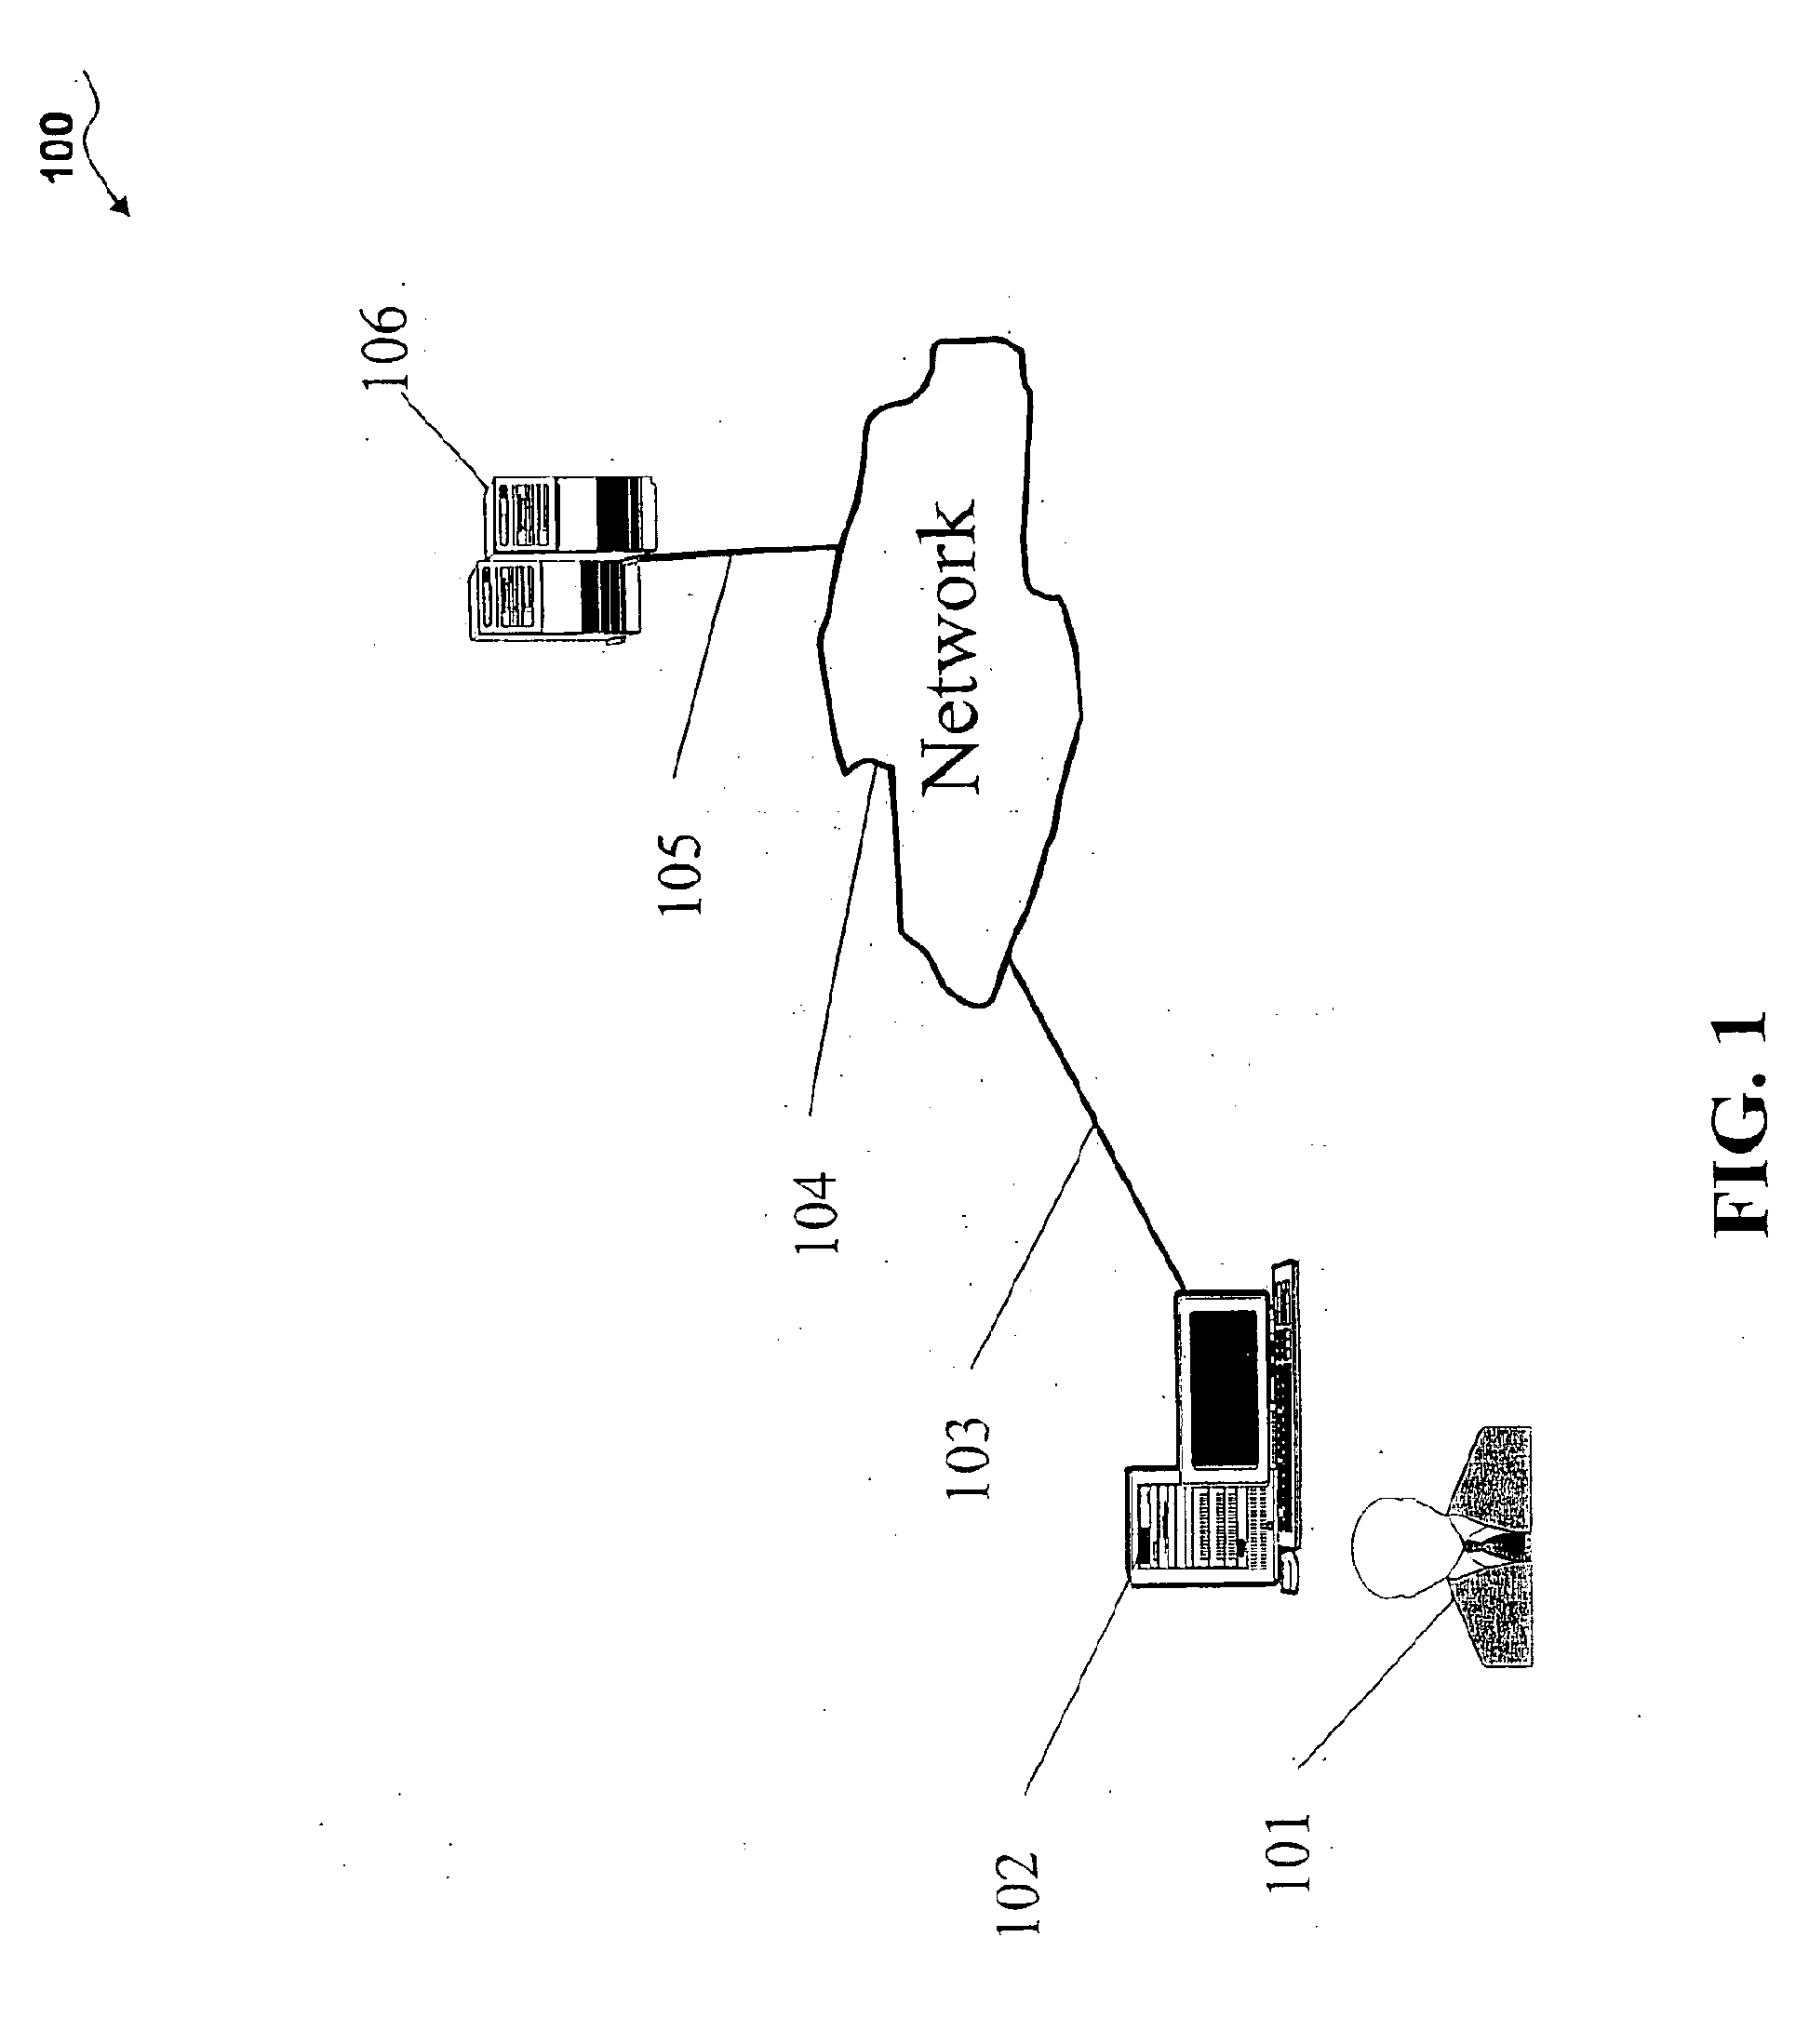 System and Method for Wikifying Content for Knowledge Navigation and Discovery